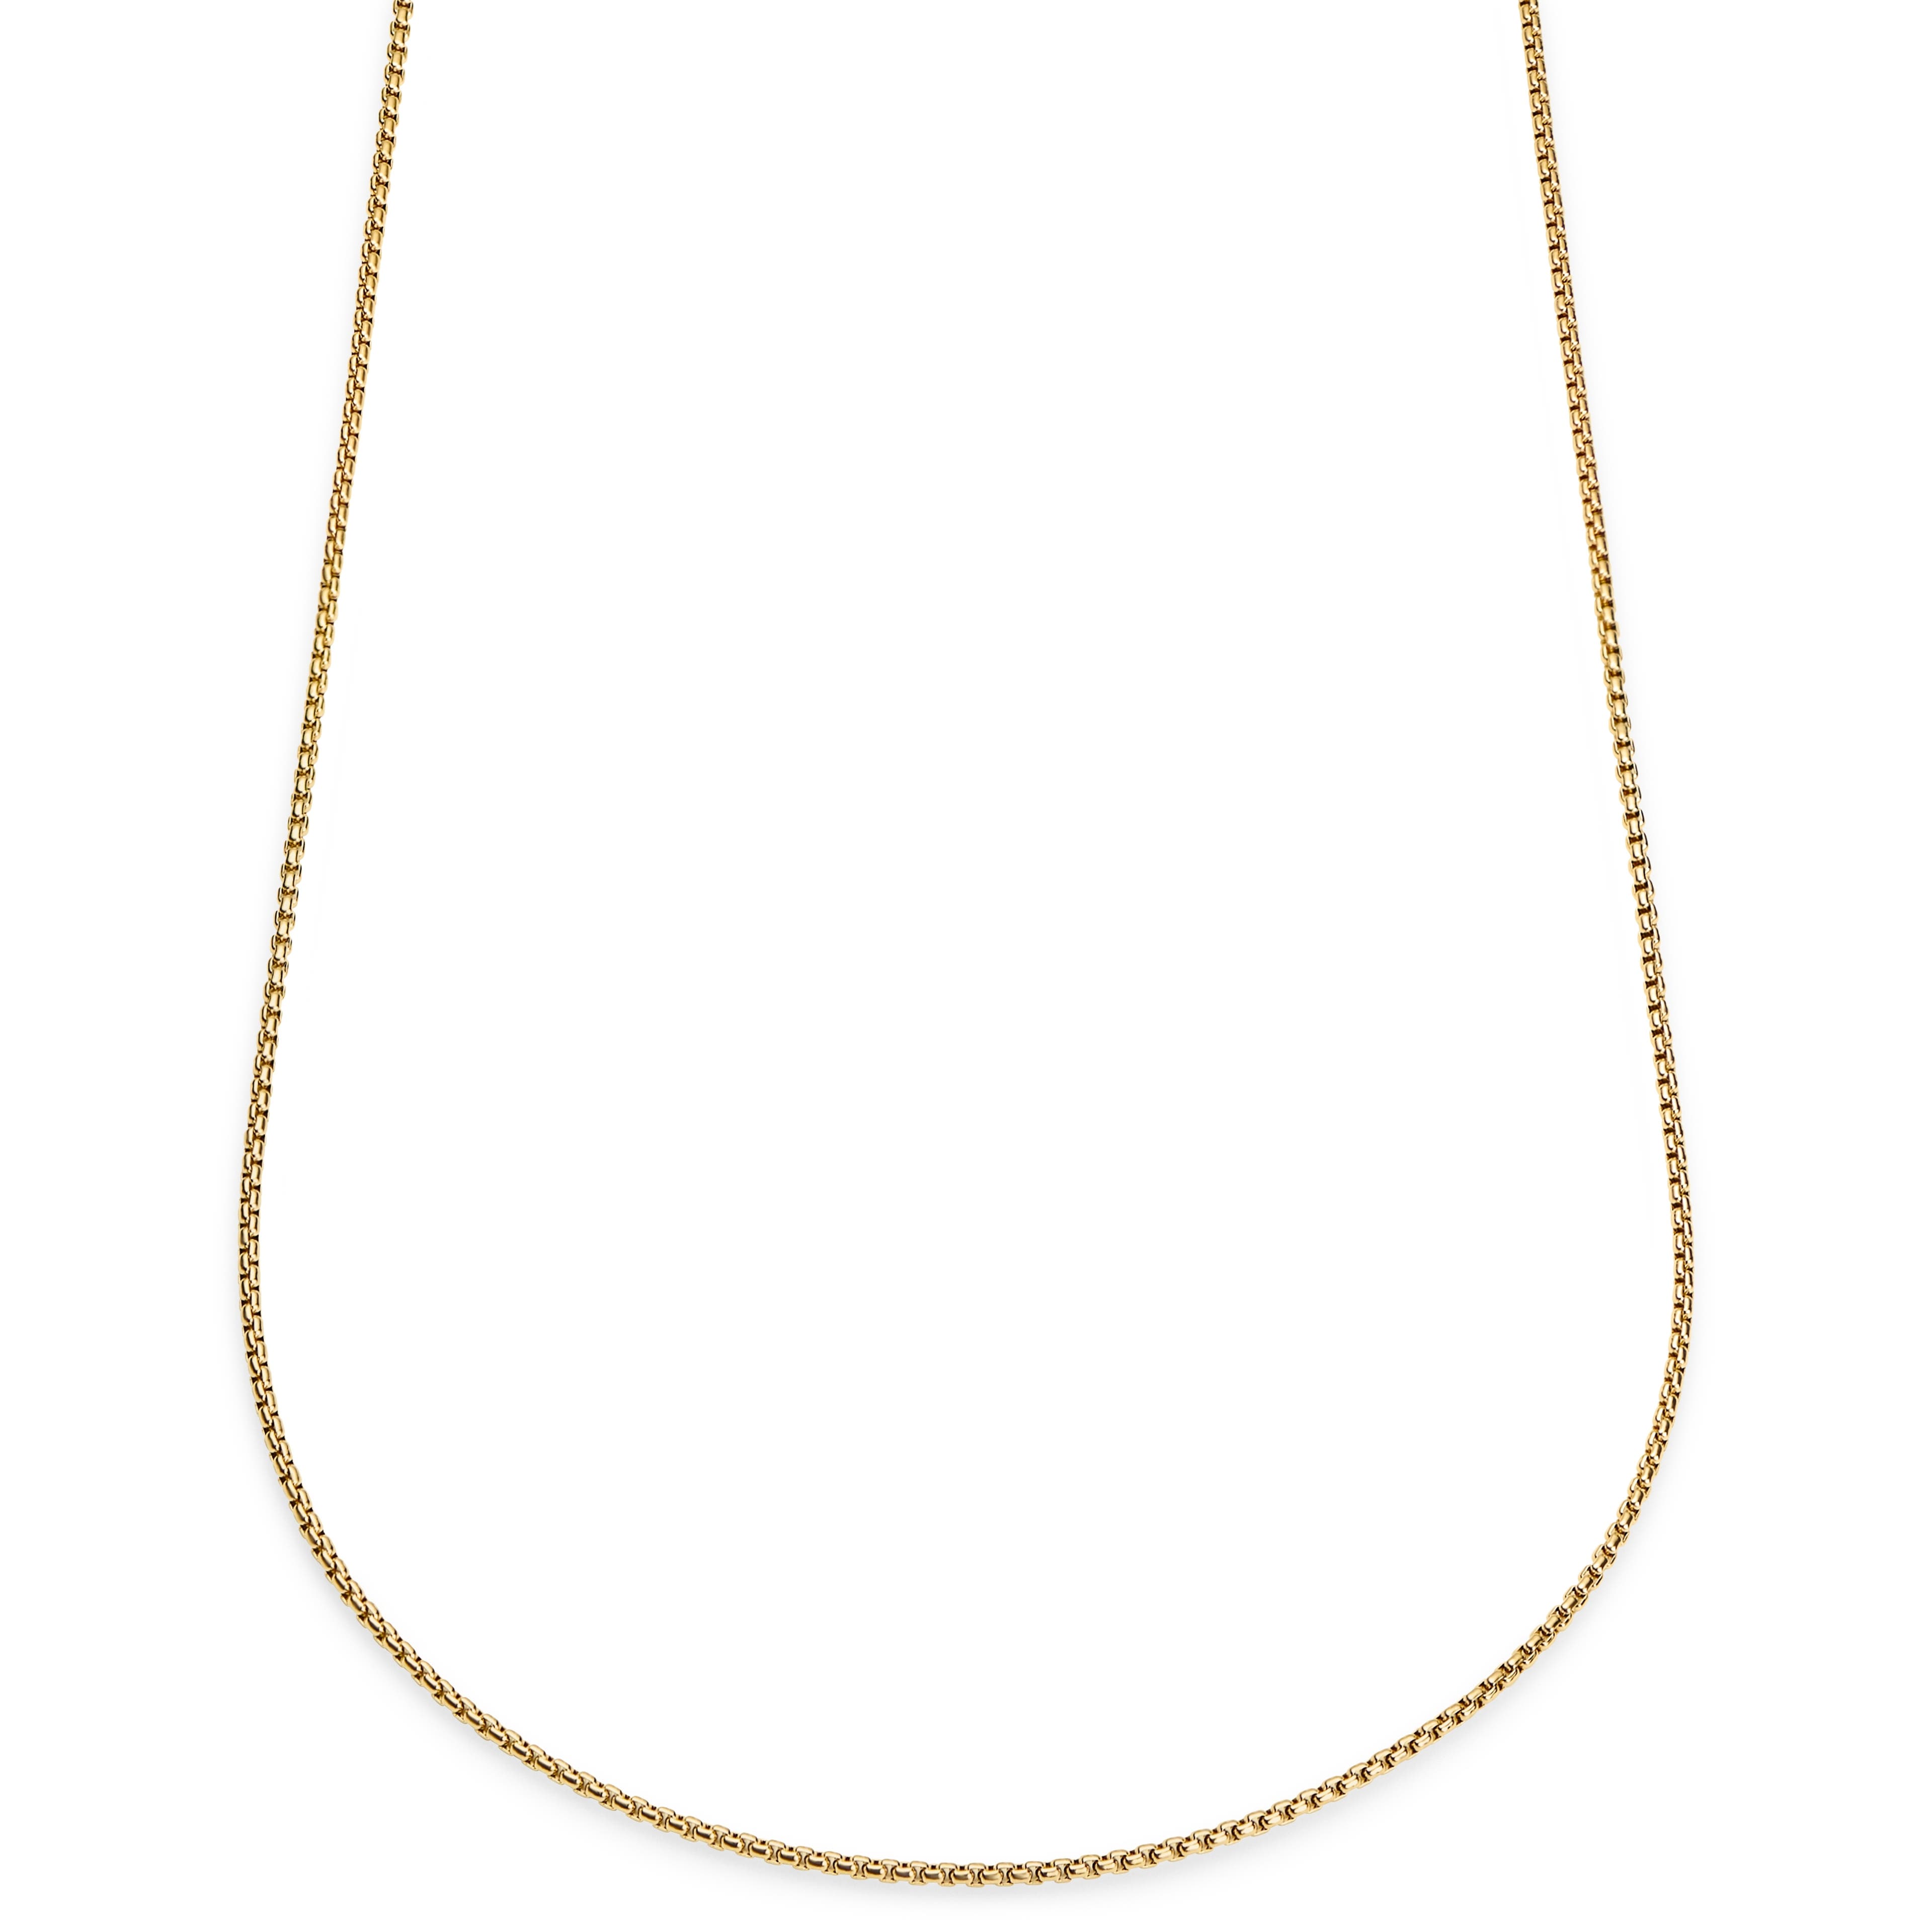 Essentials | 2 mm Gold-Tone Curved Box Chain Necklace